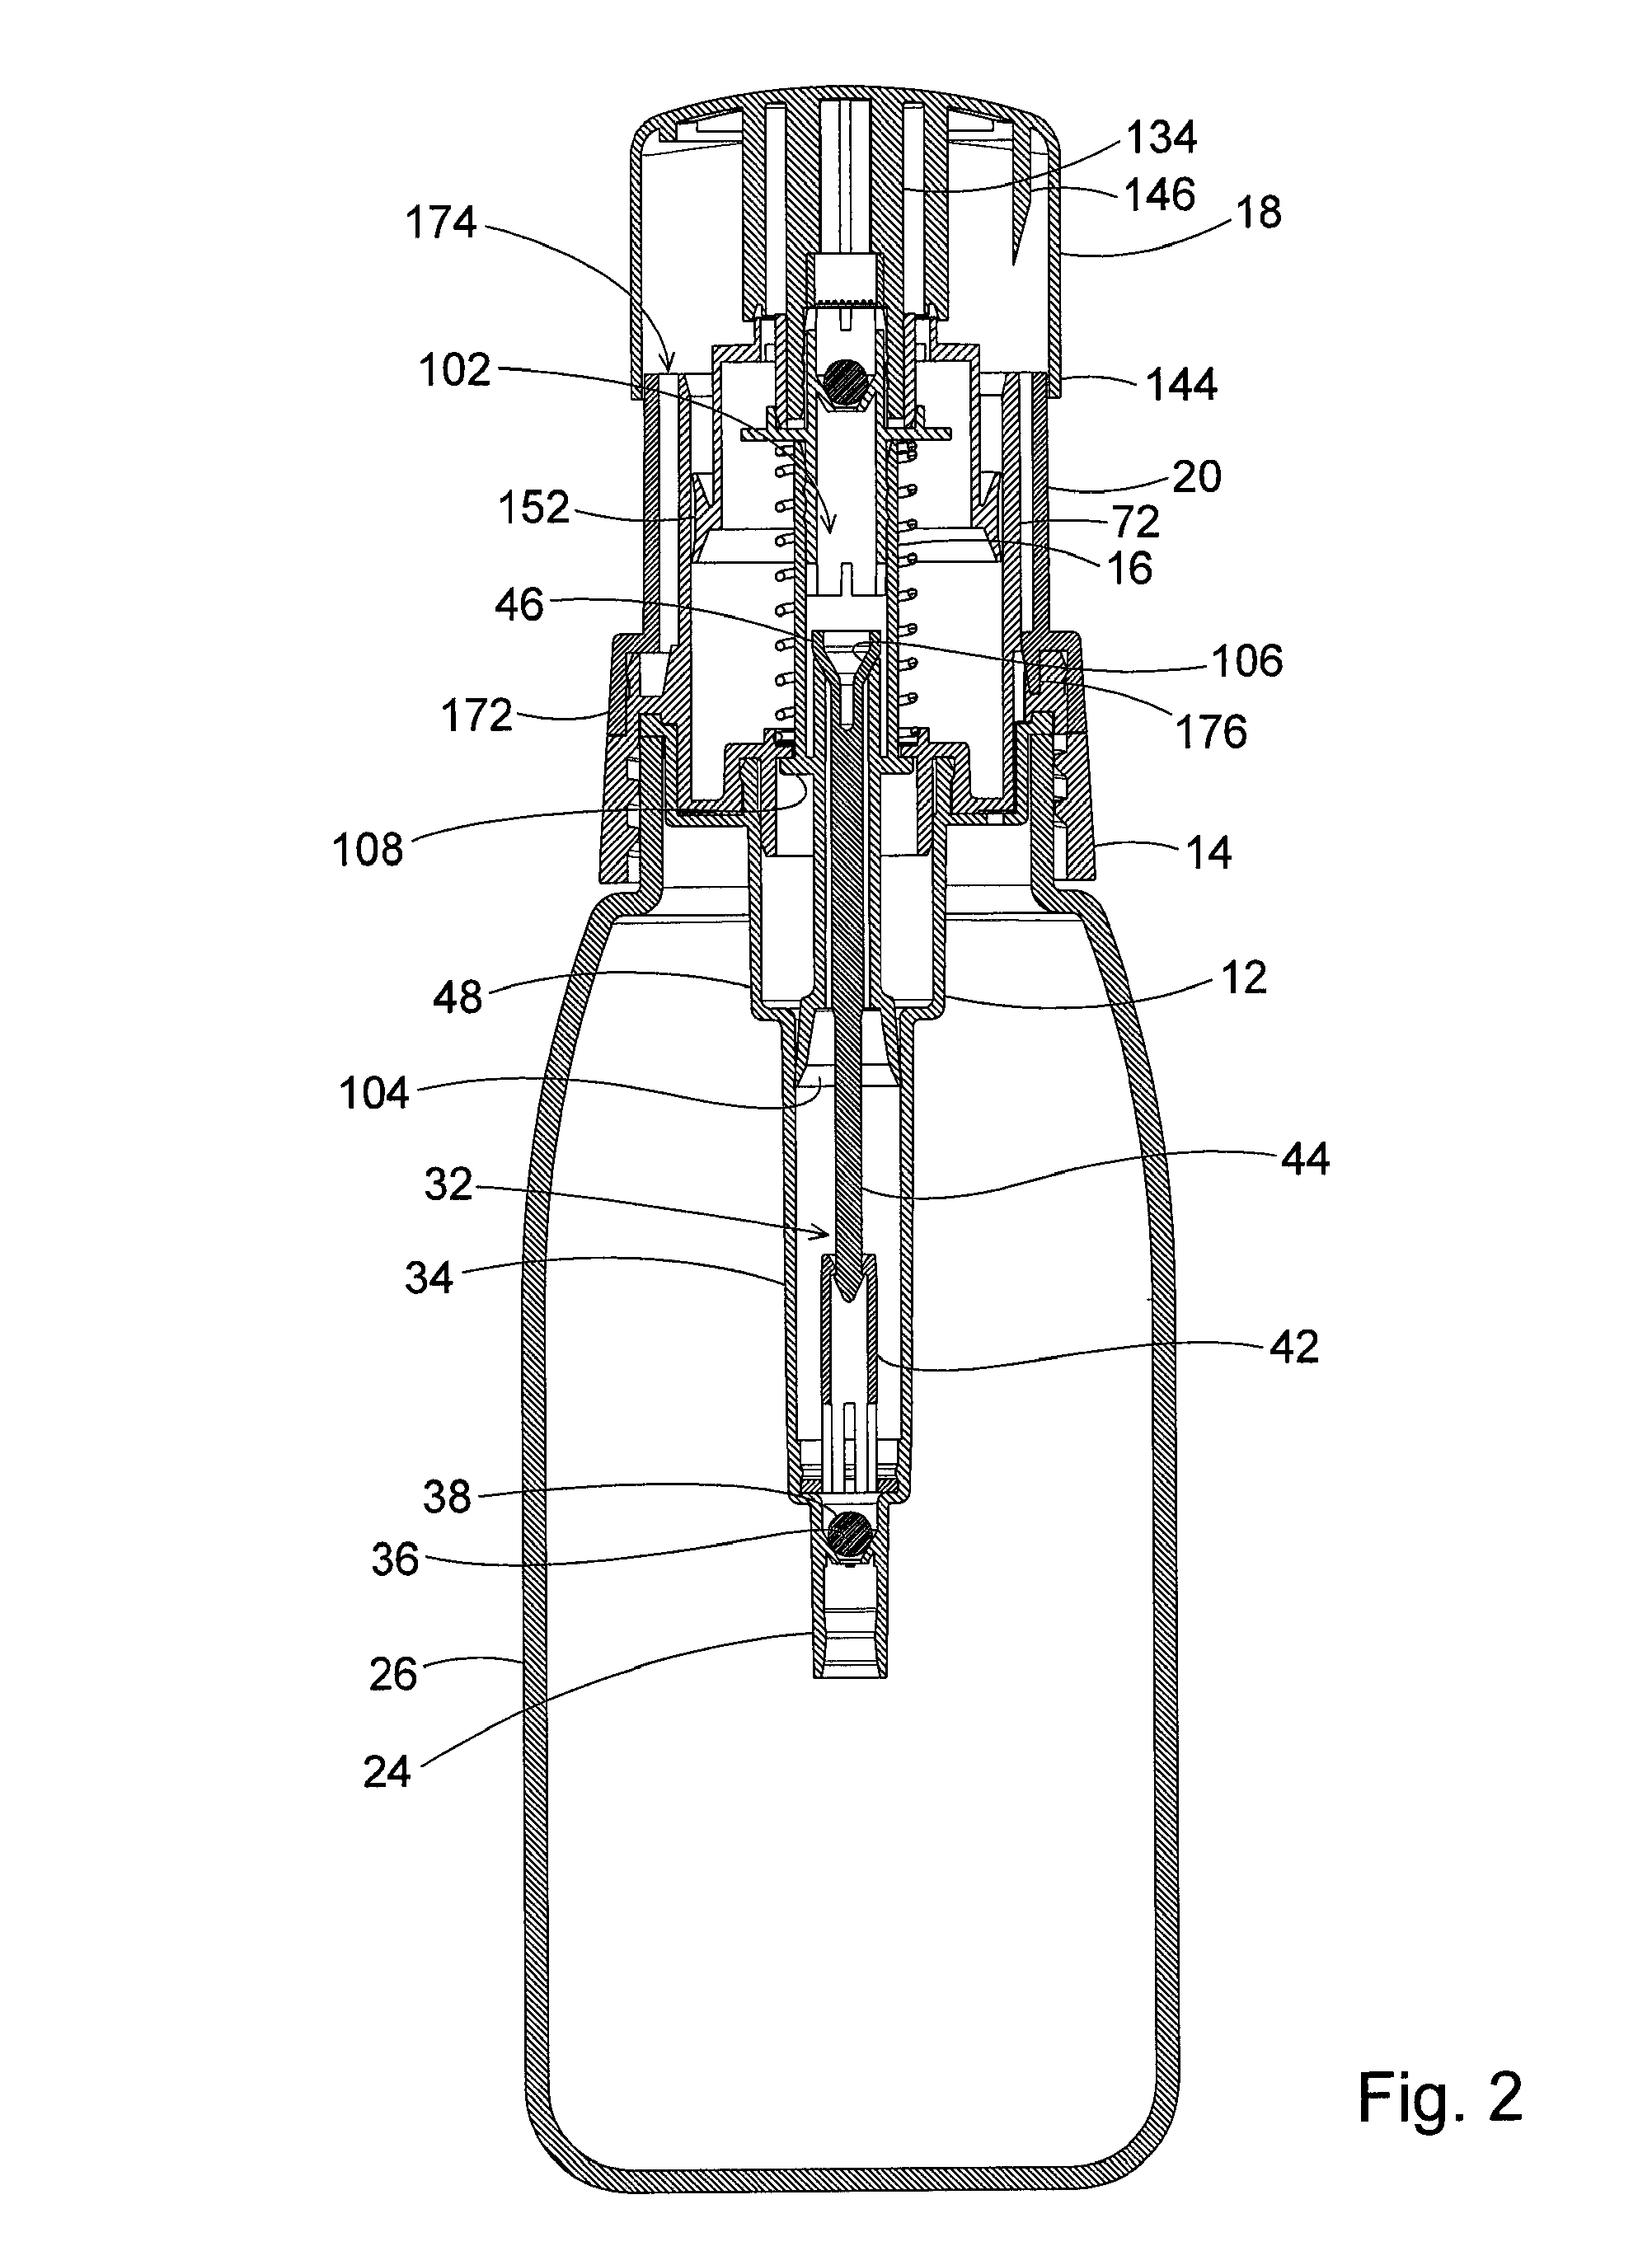 Rotating Collar and Locking and Venting Closure Connector for an Air Foaming Pump Dispenser